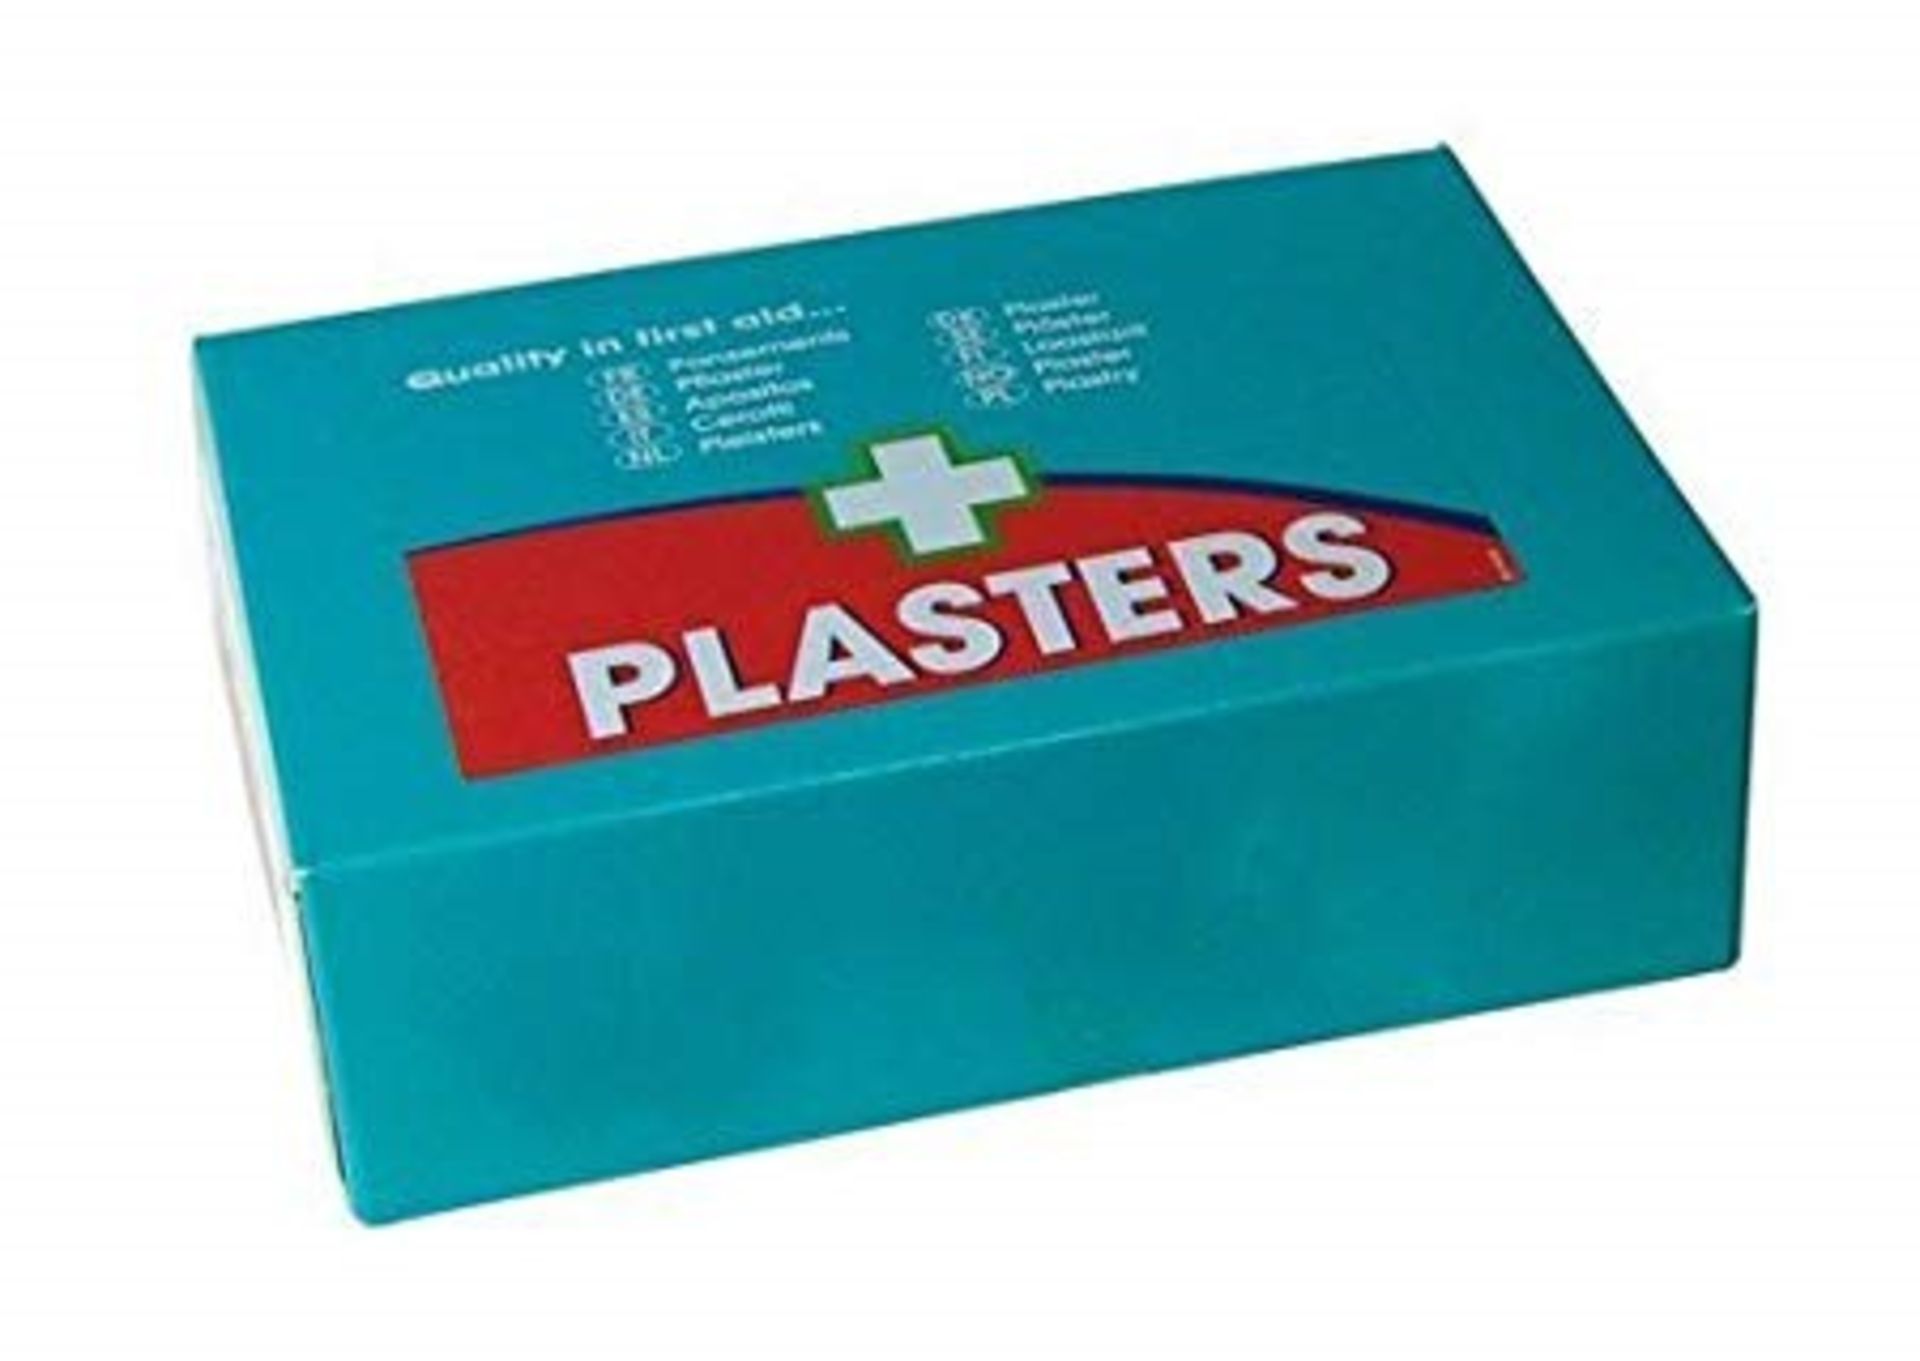 1 LOT TO CONTAIN 3 ASTROPLAST FABRIC PLASTERS REFILL / PN - 350 / RRP £29.16 (VIEWING HIGHLY